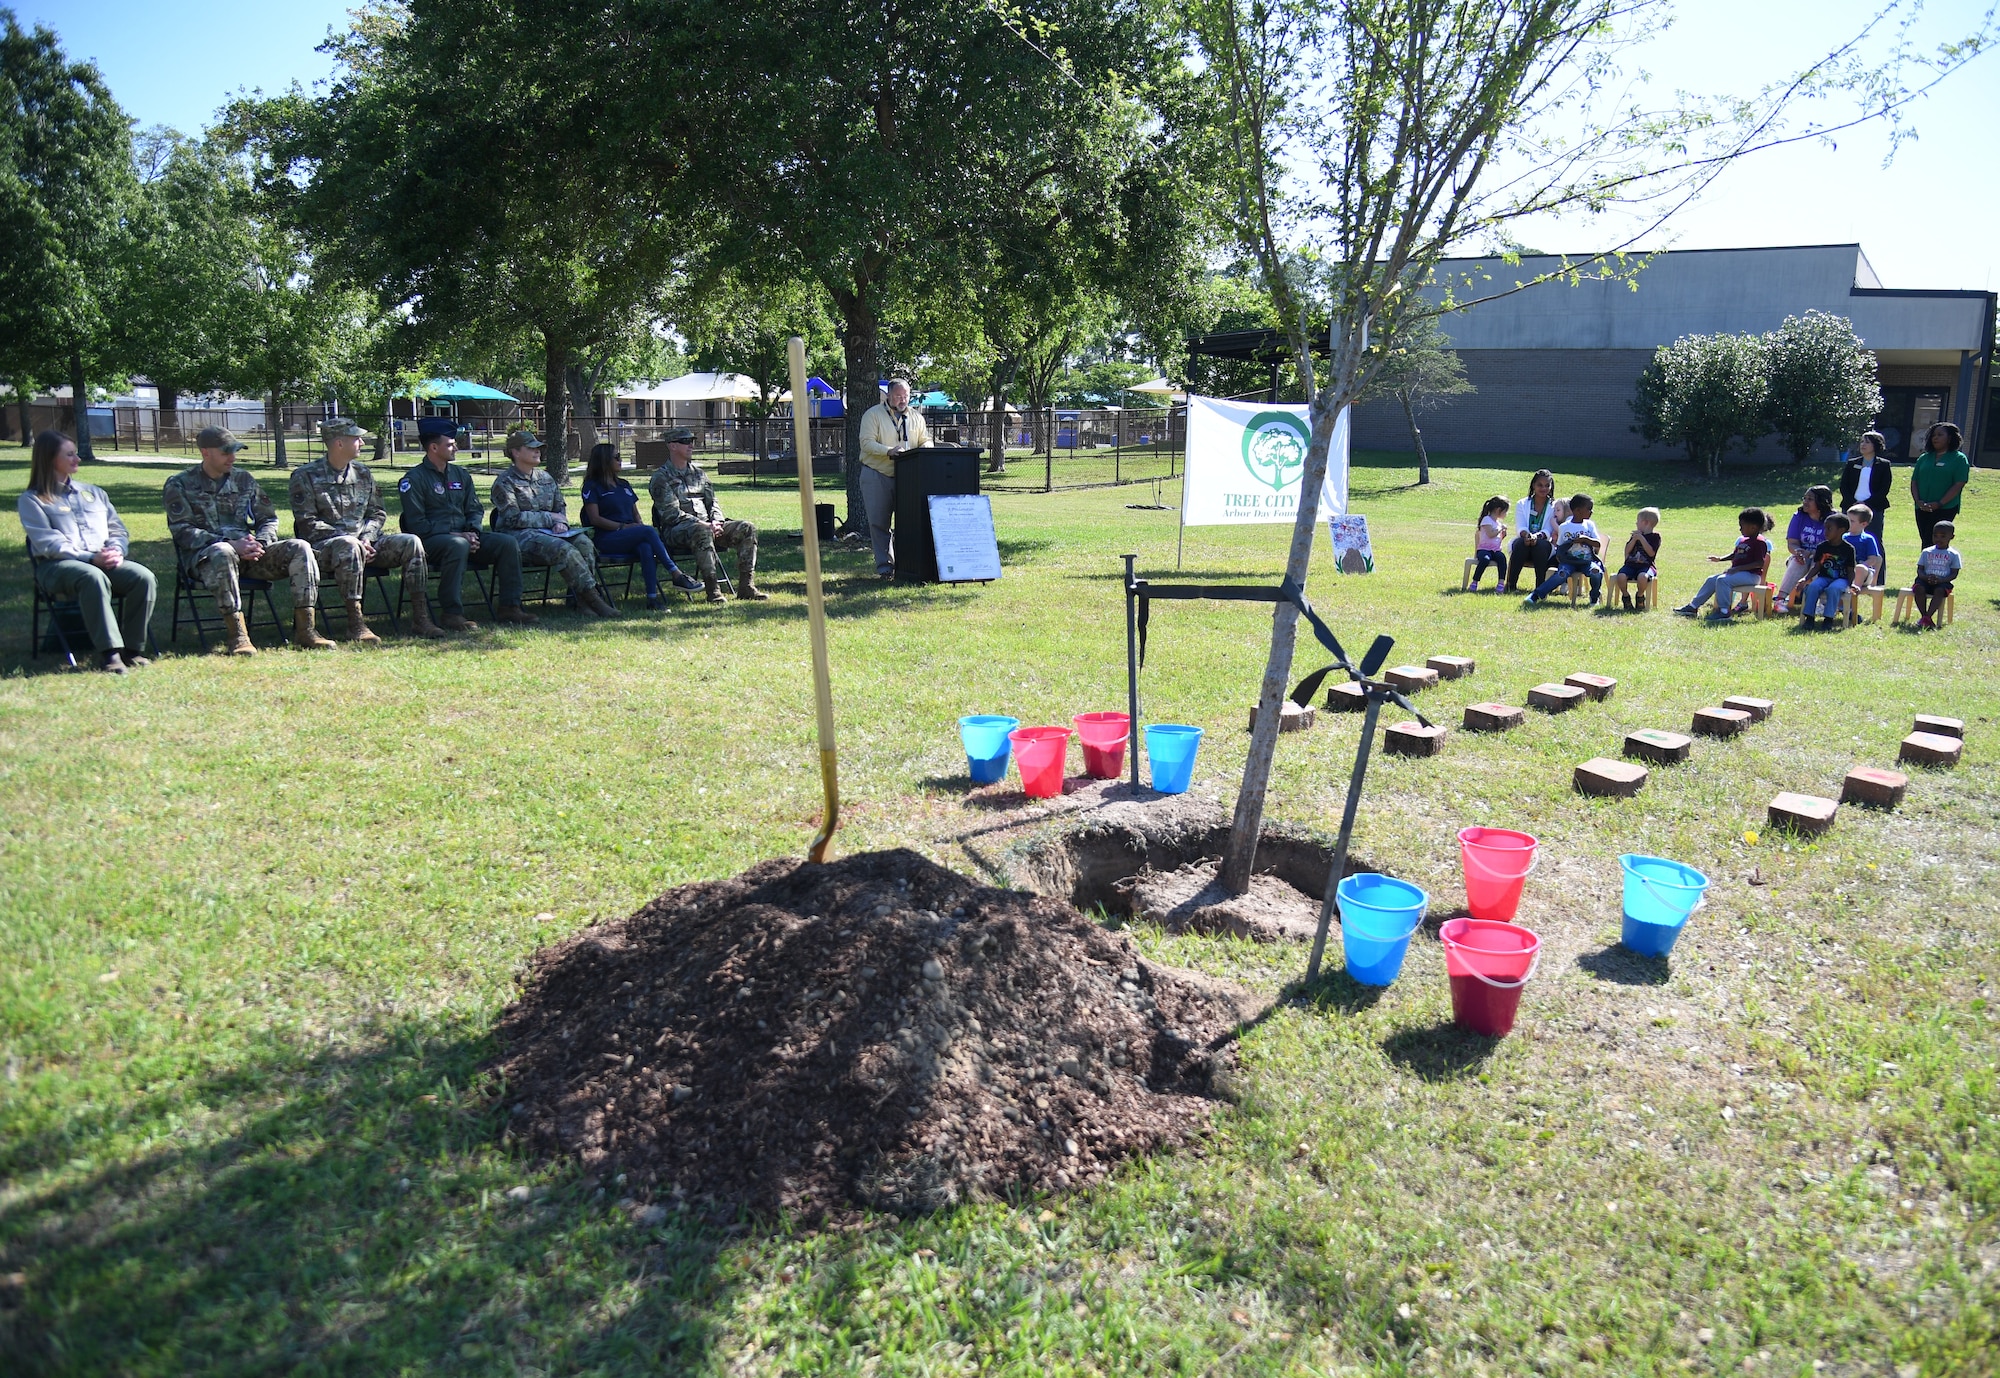 Keesler personnel and children from the Child Development Center attend the Arbor Day Celebration at Keesler Air Force Base, Mississippi, April 28, 2022. A tree planting ceremony and a Tree City USA flag presentation took place at the event. (U.S. Air Force photo by Kemberly Groue)